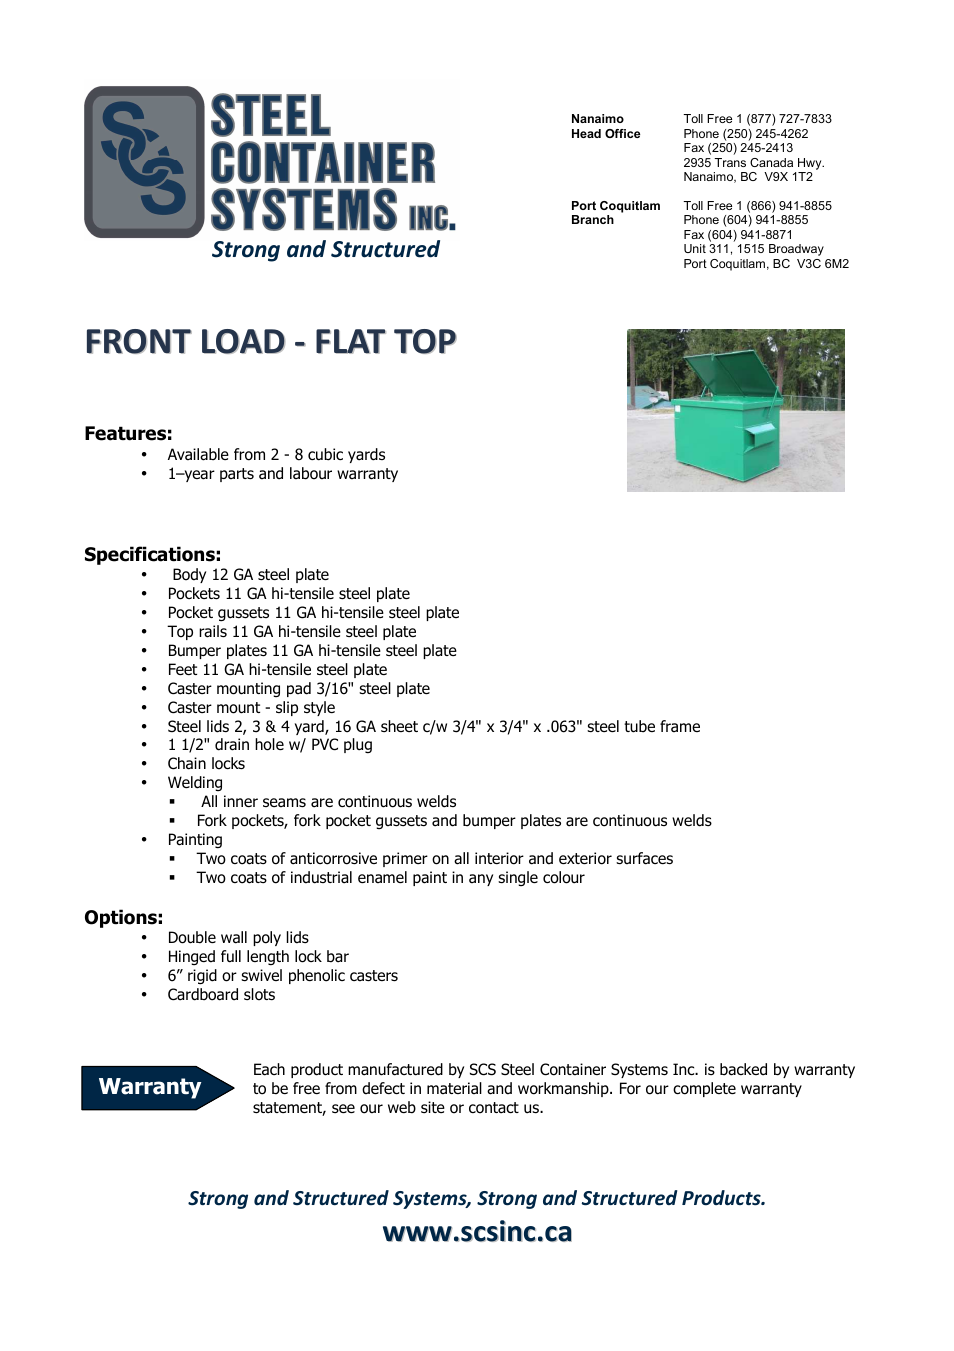 FRONT LOAD - FLAT TOP